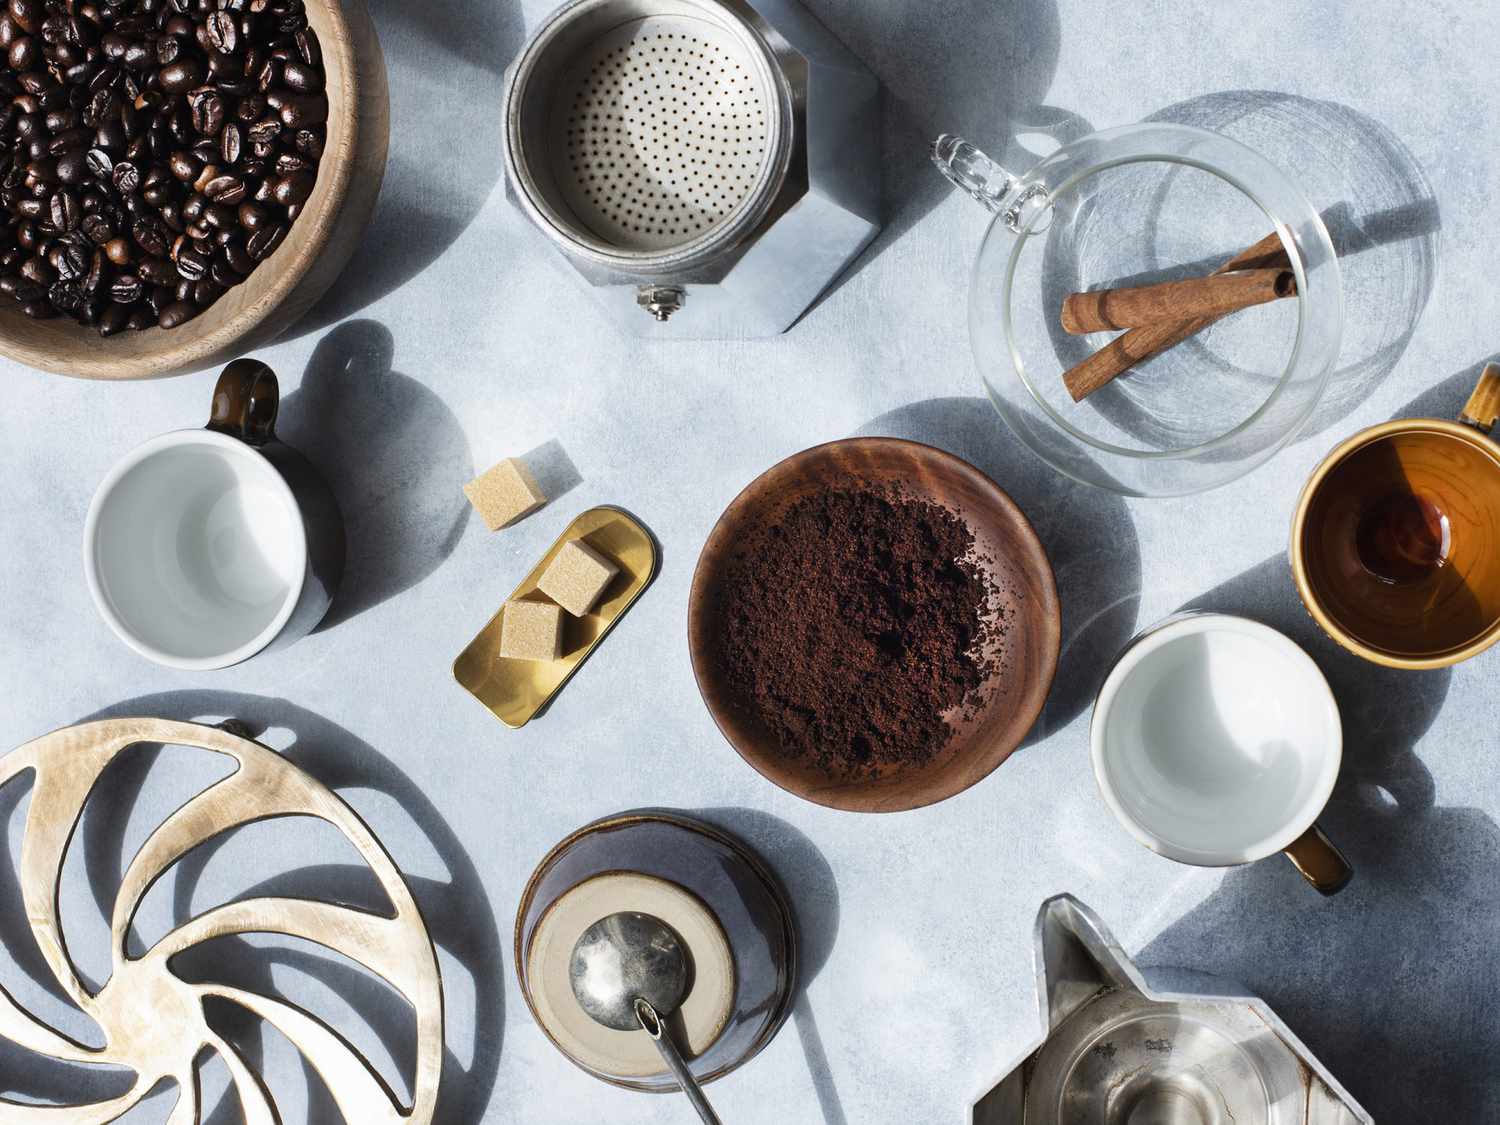 Overhead view of still life with coffee beans and accessories